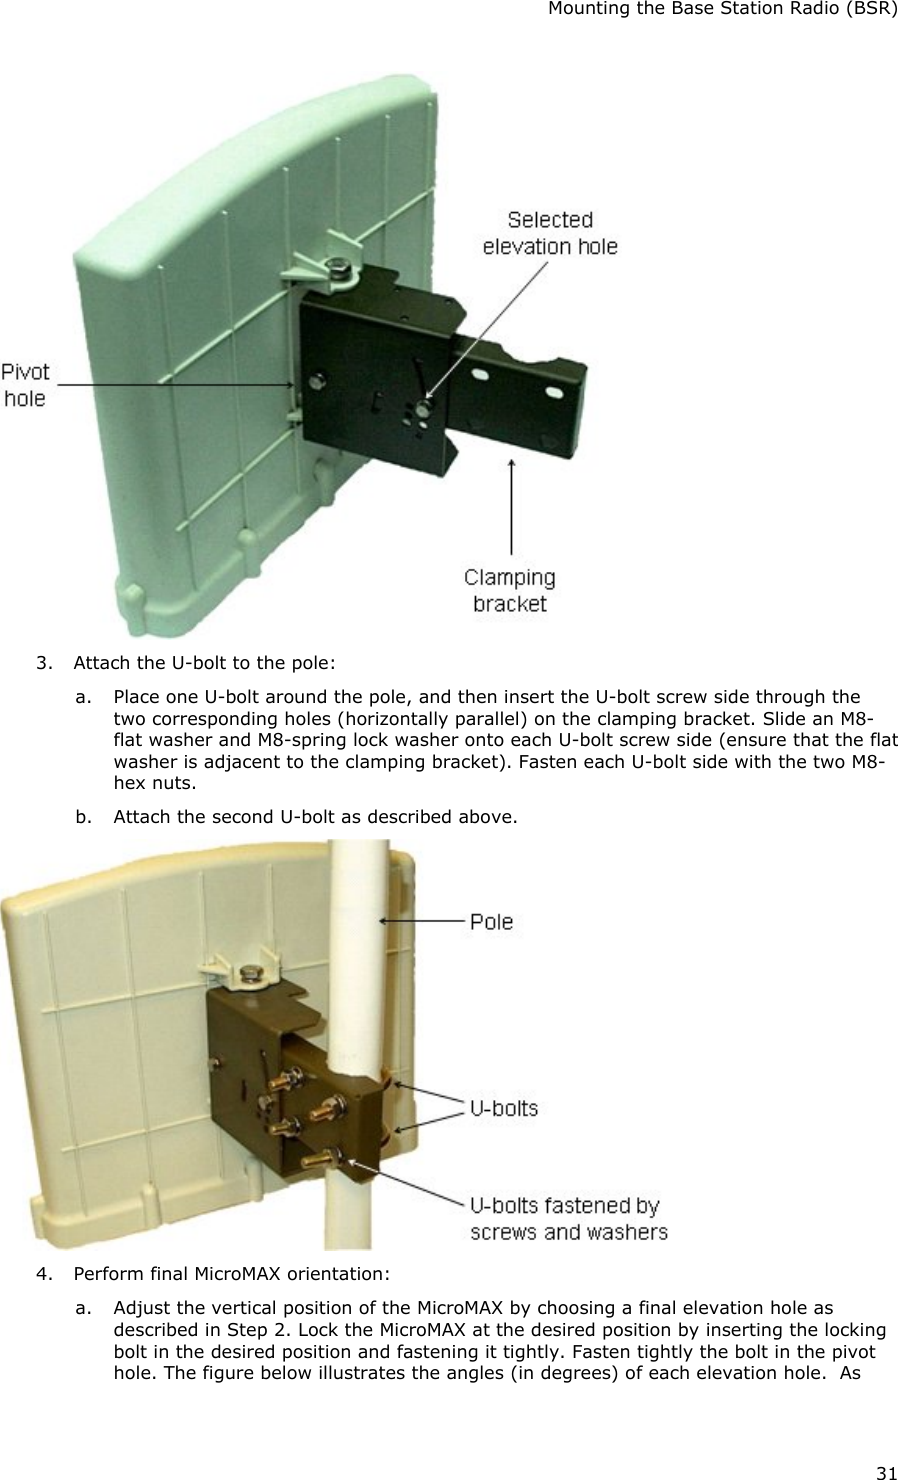 Mounting the Base Station Radio (BSR) 31  3. Attach the U-bolt to the pole: a. Place one U-bolt around the pole, and then insert the U-bolt screw side through the two corresponding holes (horizontally parallel) on the clamping bracket. Slide an M8-flat washer and M8-spring lock washer onto each U-bolt screw side (ensure that the flat washer is adjacent to the clamping bracket). Fasten each U-bolt side with the two M8-hex nuts.  b. Attach the second U-bolt as described above.  4. Perform final MicroMAX orientation: a. Adjust the vertical position of the MicroMAX by choosing a final elevation hole as described in Step 2. Lock the MicroMAX at the desired position by inserting the locking bolt in the desired position and fastening it tightly. Fasten tightly the bolt in the pivot hole. The figure below illustrates the angles (in degrees) of each elevation hole.  As 